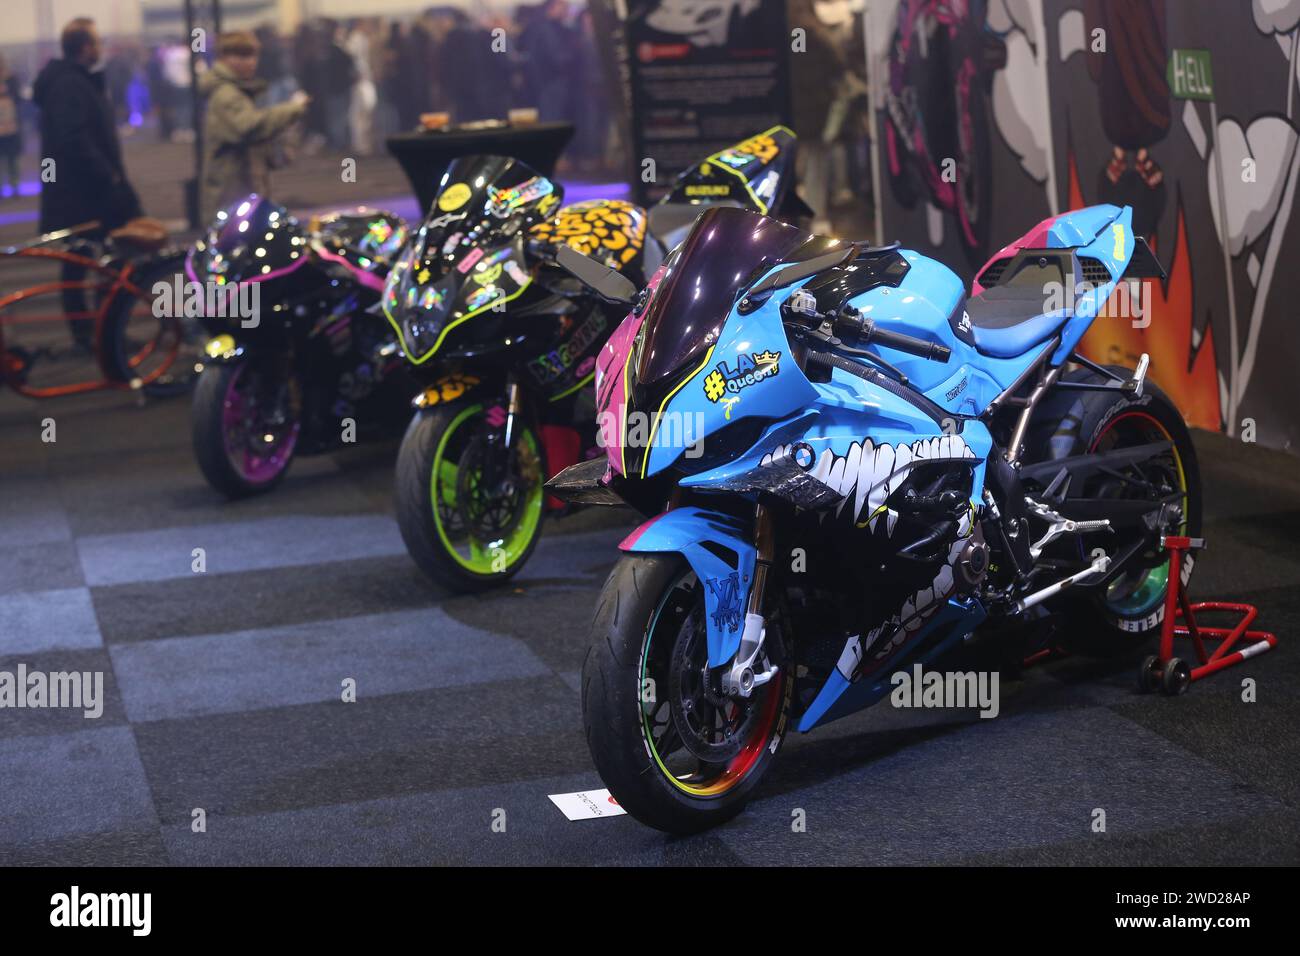 Brussels. 17th Jan, 2024. This photo taken on Jan. 17, 2024 shows motorcycles displayed at Brussels Auto Show in Brussels, Belgium. This year's Brussels Auto Show (BAS) kicked off on Wednesday in the Belgian capital, presenting over 400 cars, motorcycles, and trucks from more than 150 companies, putting sustainable mobility in the limelight. Credit: Zhao Dingzhe/Xinhua/Alamy Live News Stock Photo